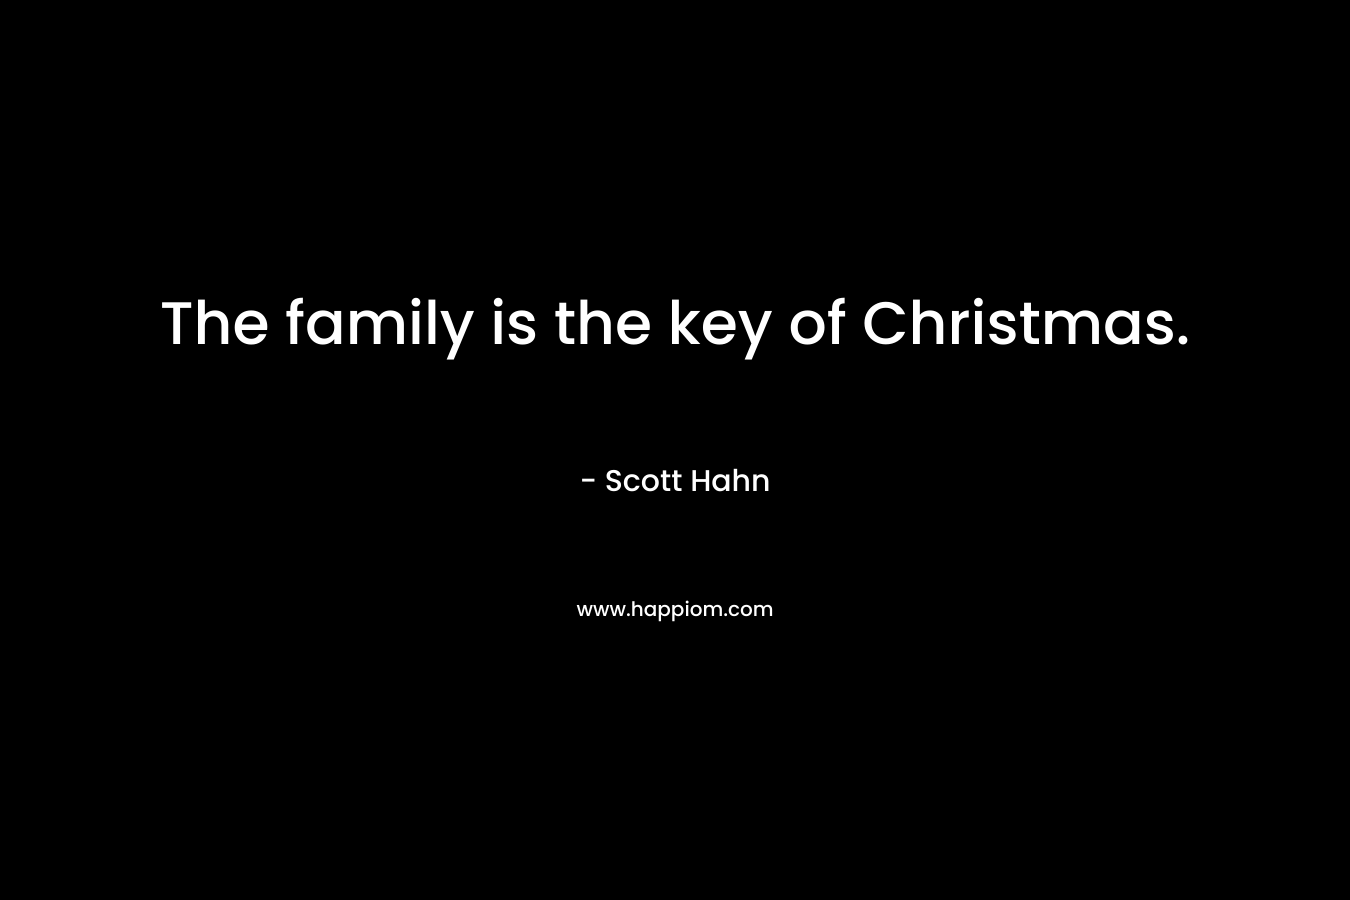 The family is the key of Christmas.